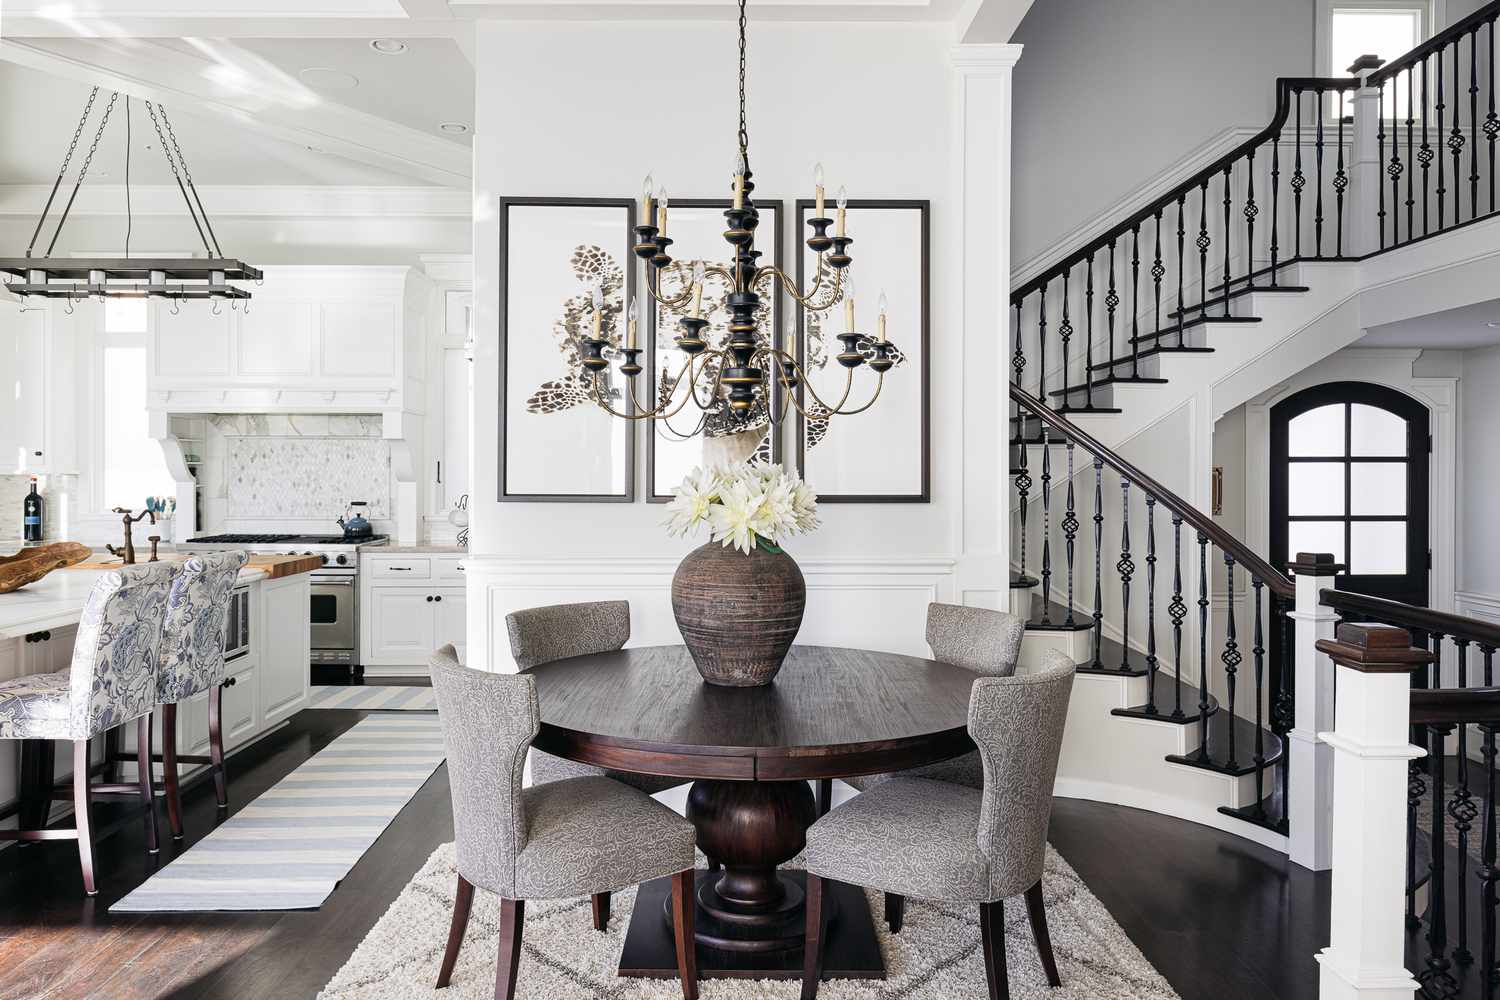 Circular dining table set in middle of monochromatic black and white house